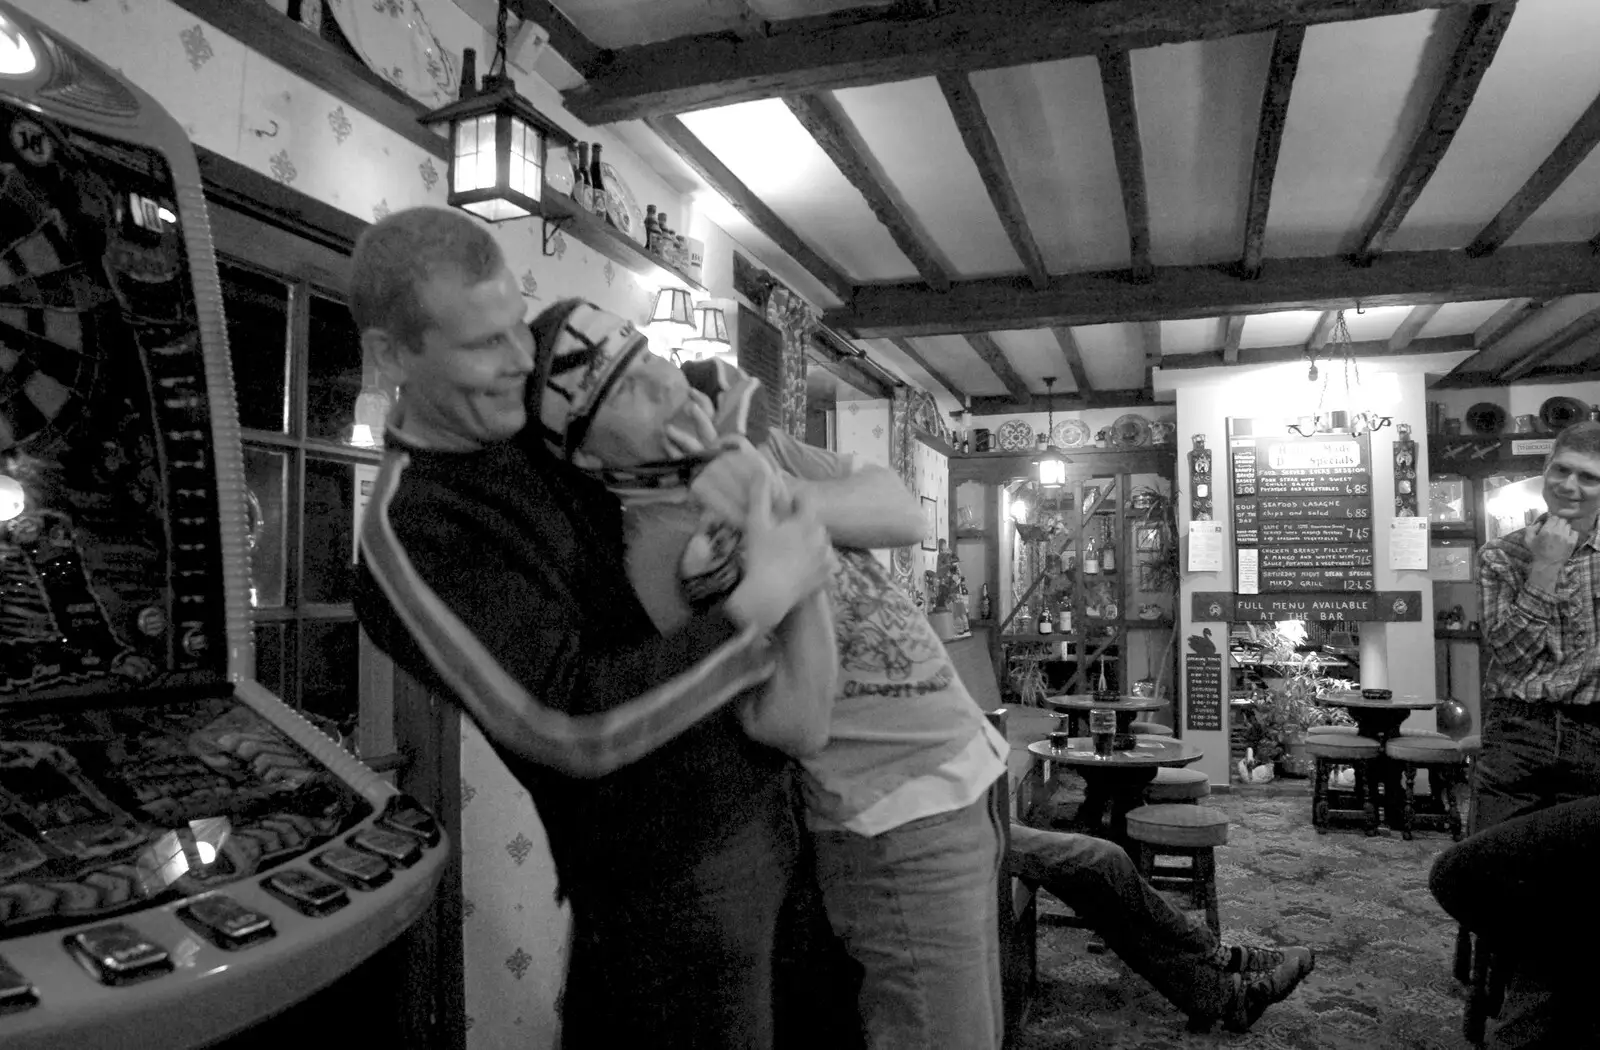 Bill and Mikey wrestle, from Paul's 30th in the Swan Inn, Brome, Suffolk - 3rd March 2007